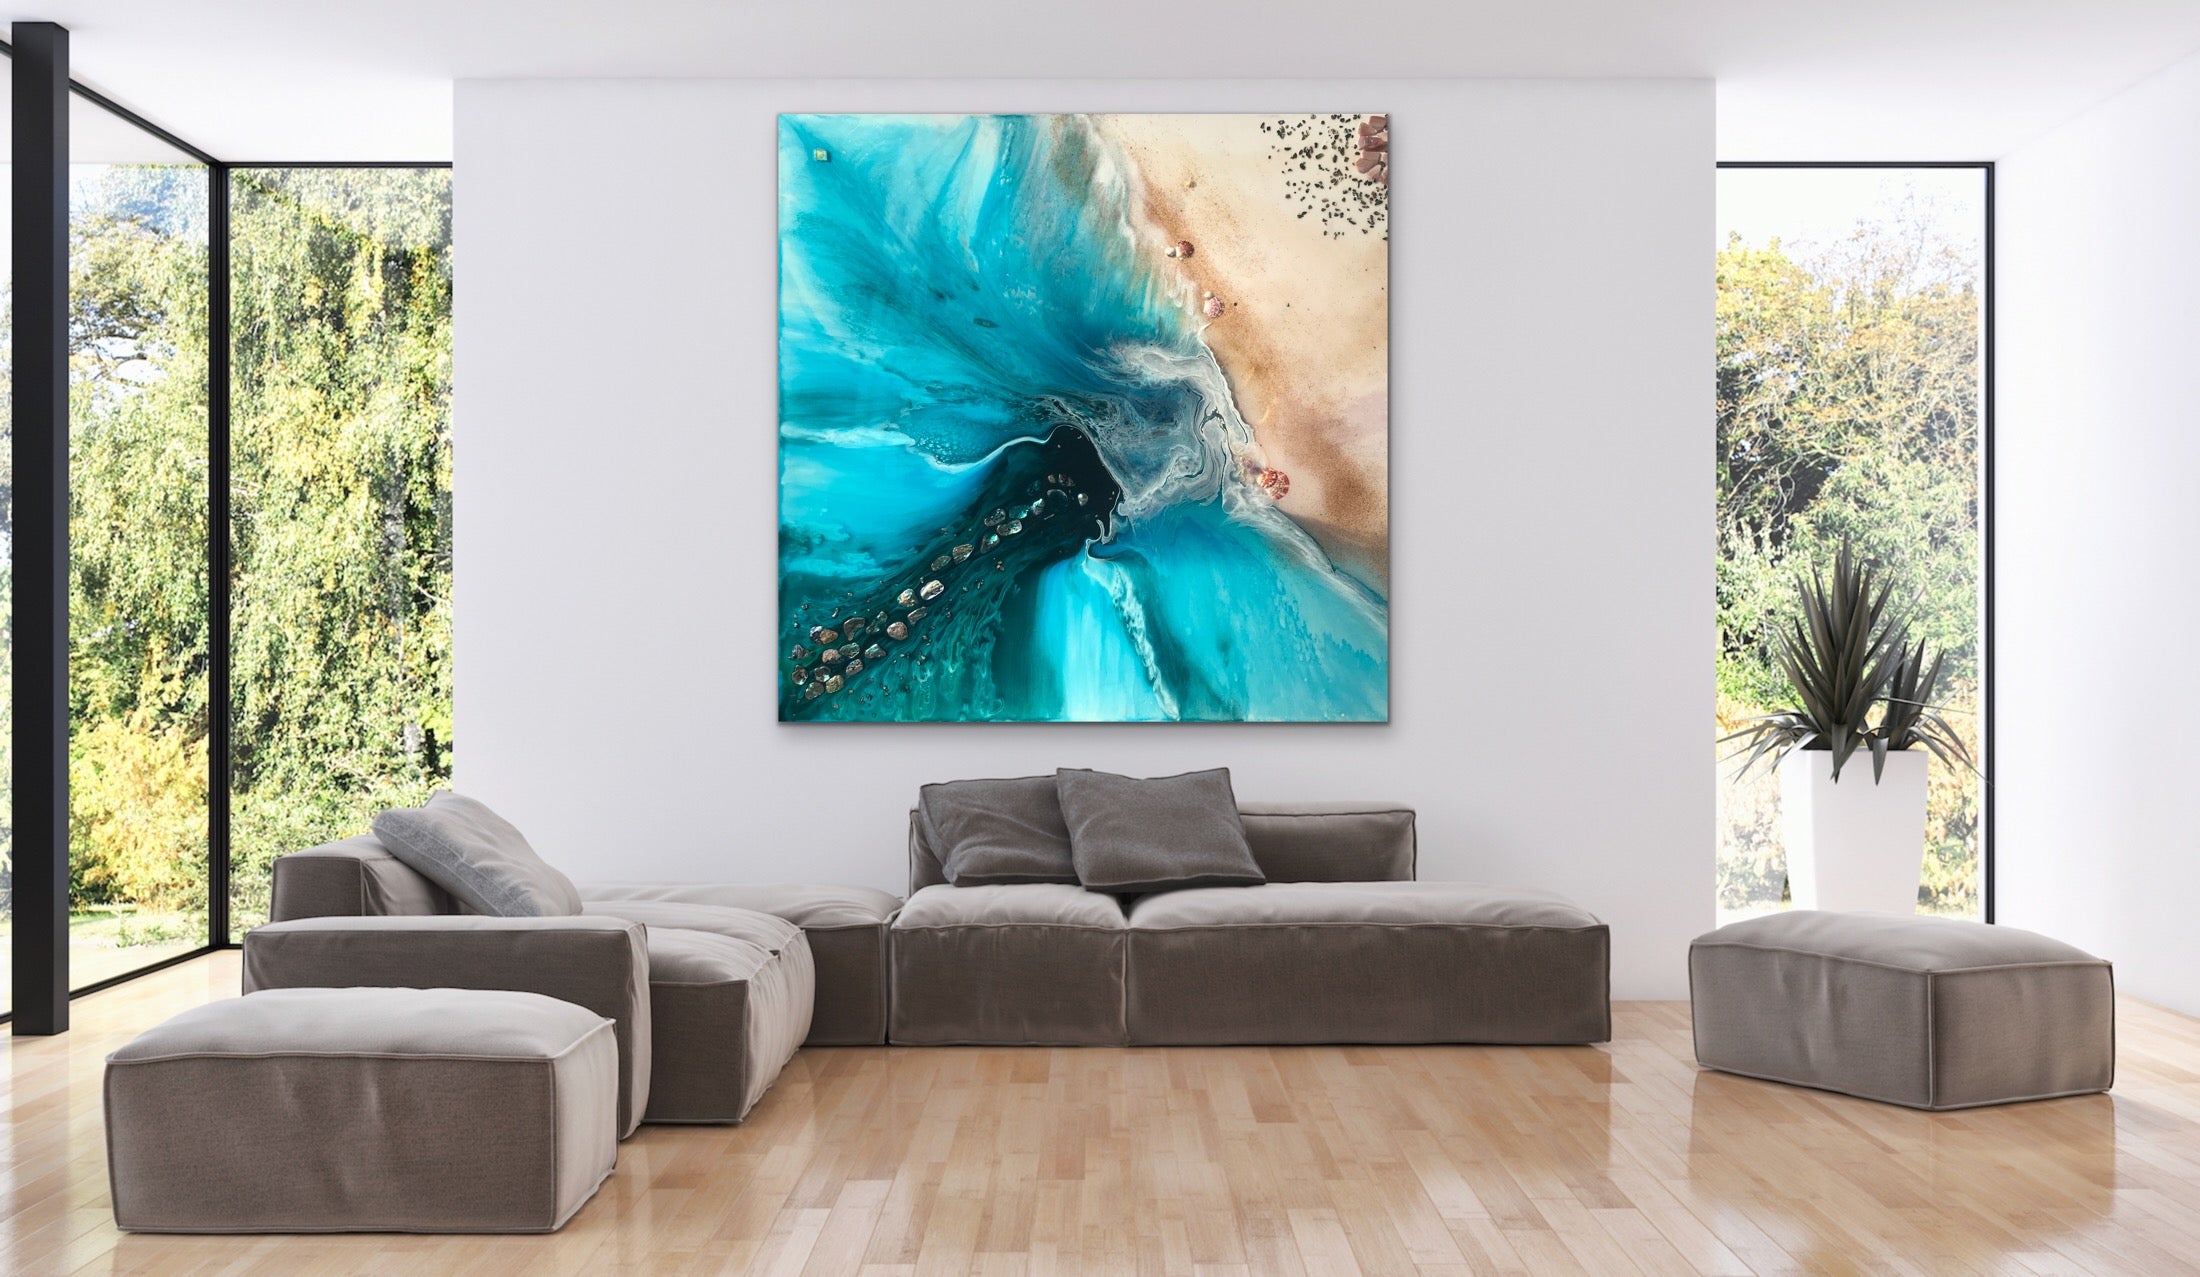 Abstract Seascape. Aqua. Rise Above 2 Square. Art Print. Antuanelle 4 Ocean Limited Edition Print